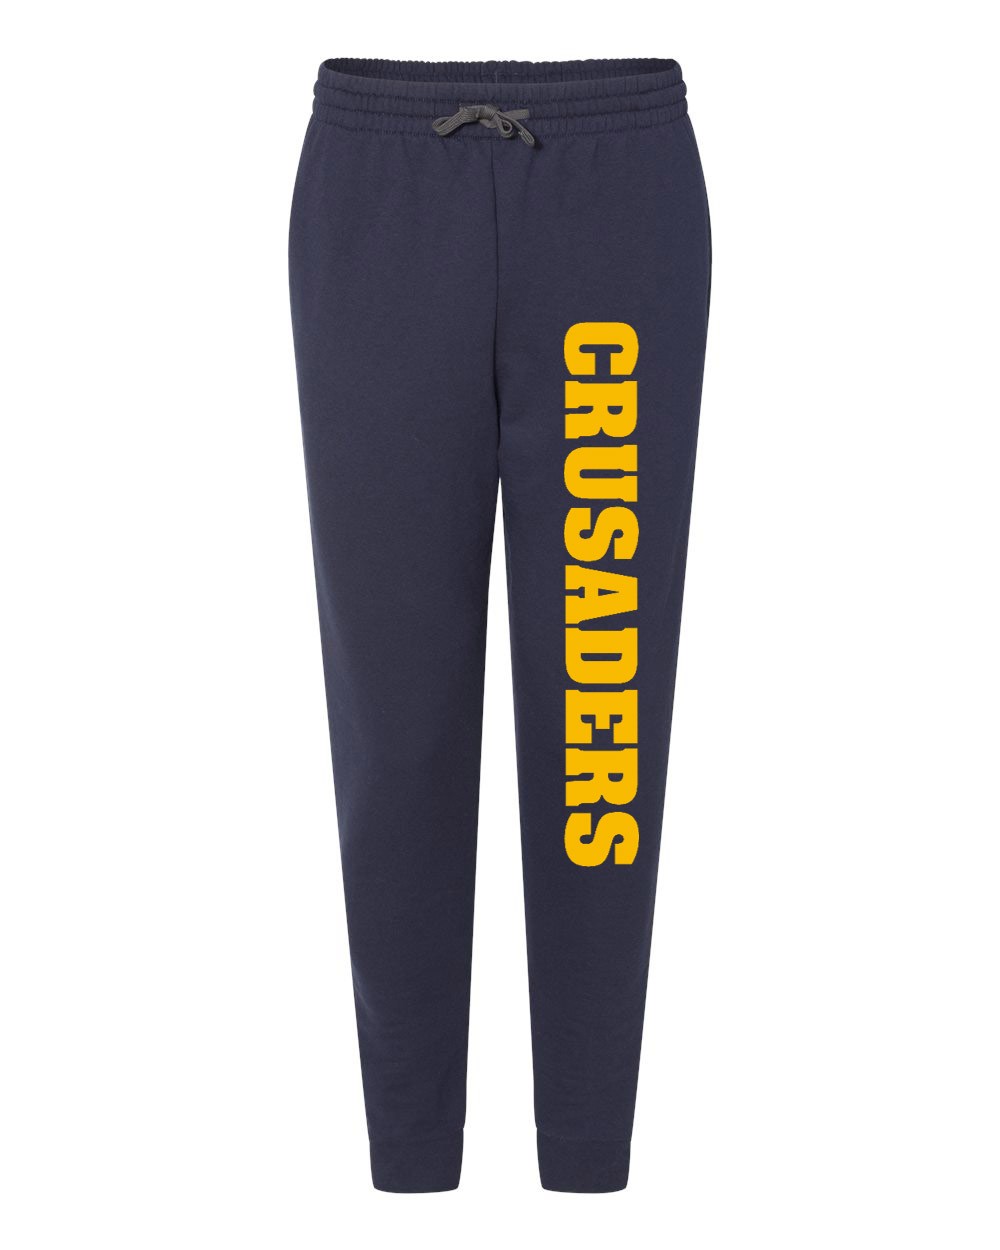 ICS Spirit Joggers w/ Logo - Please Allow 2-3 Weeks for Delivery